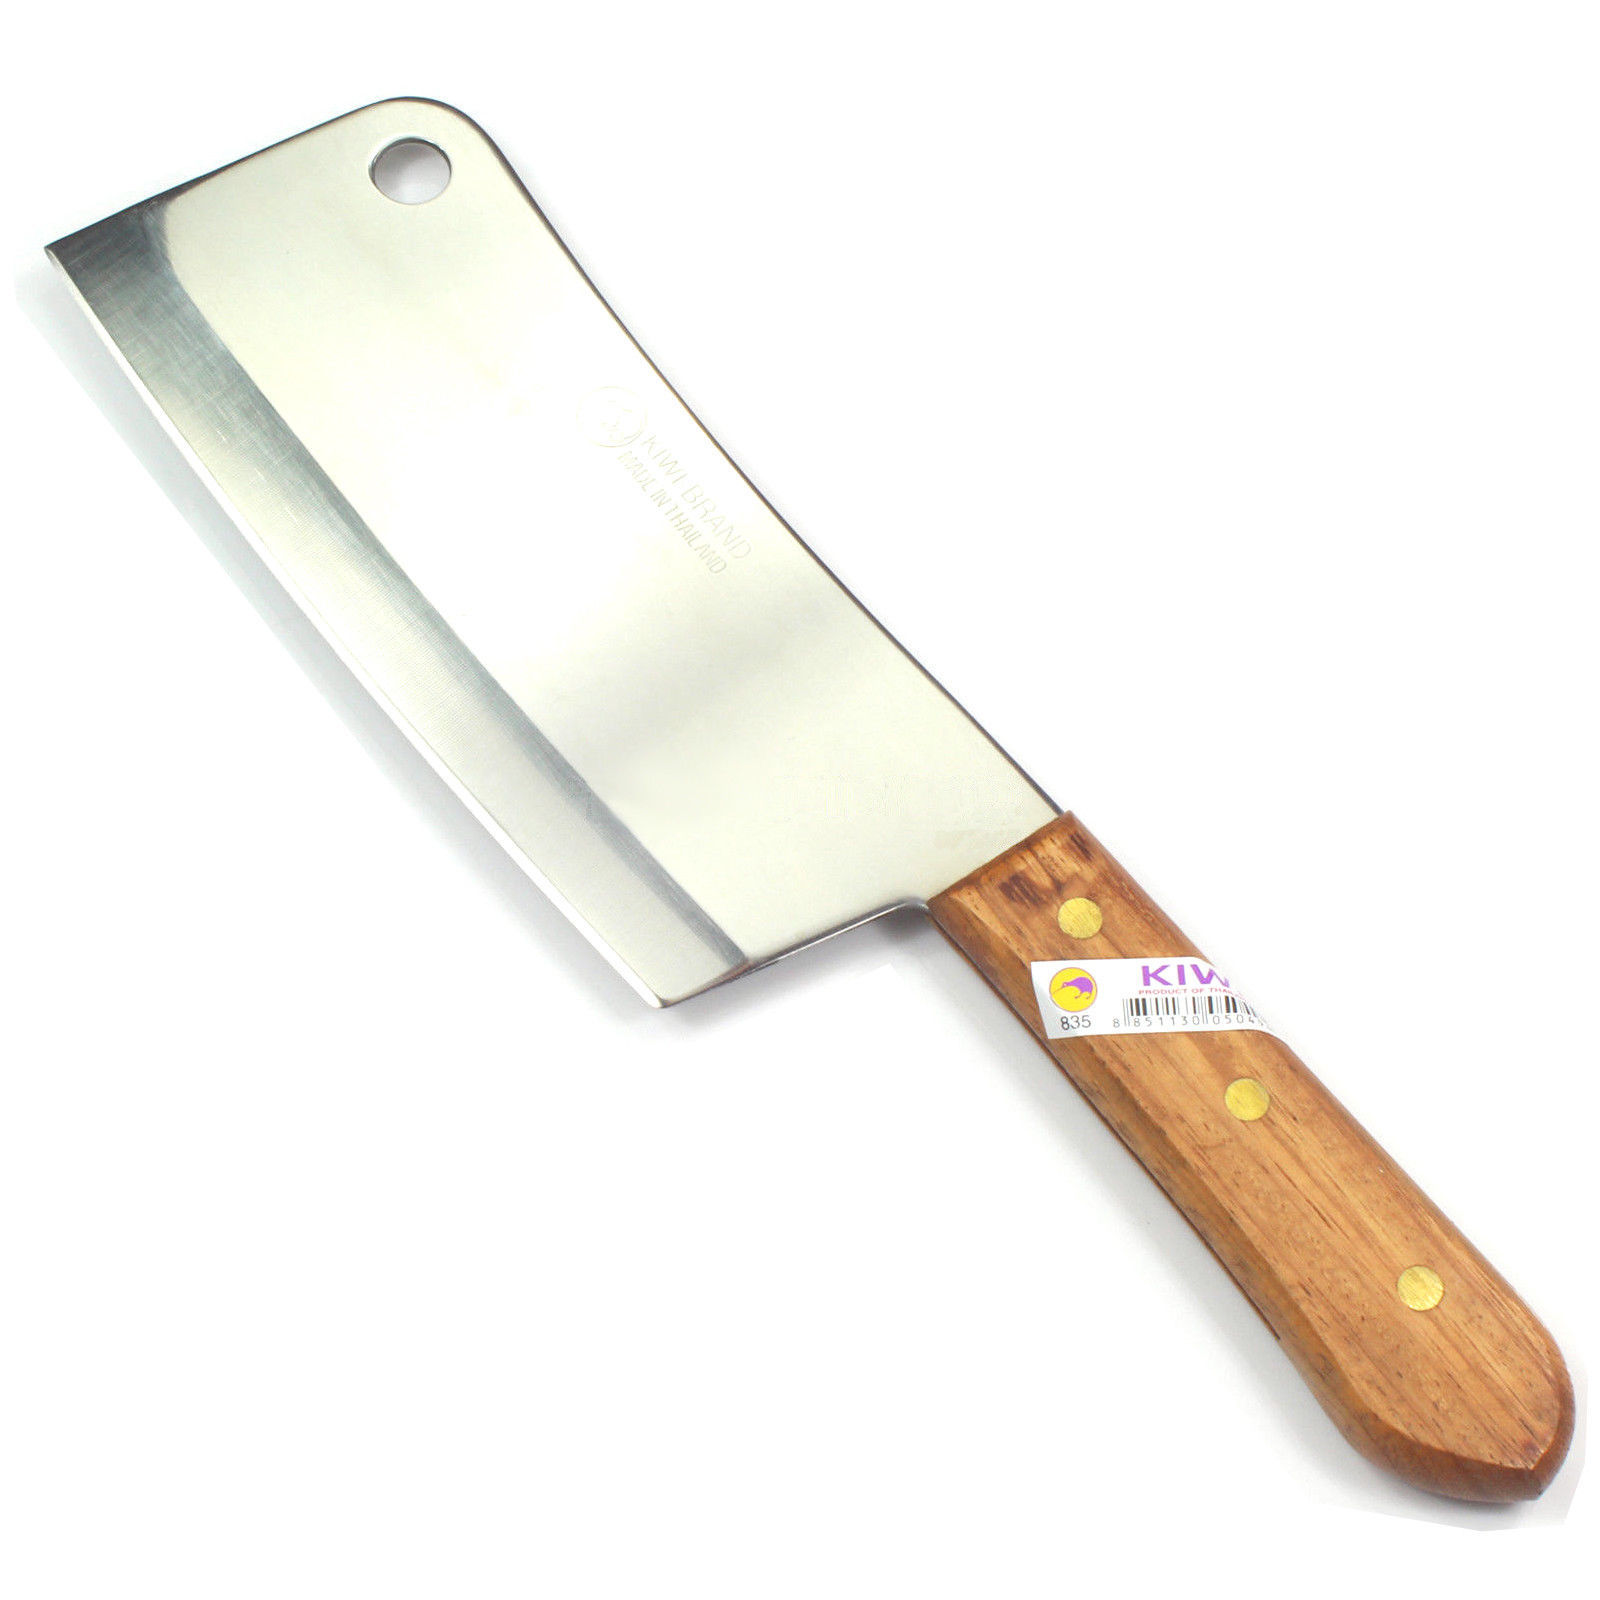 6.5 KIWI BRAND COOK KNIFE (NO. 171) - GREAT COOK CLEAVER FROM THAILAND